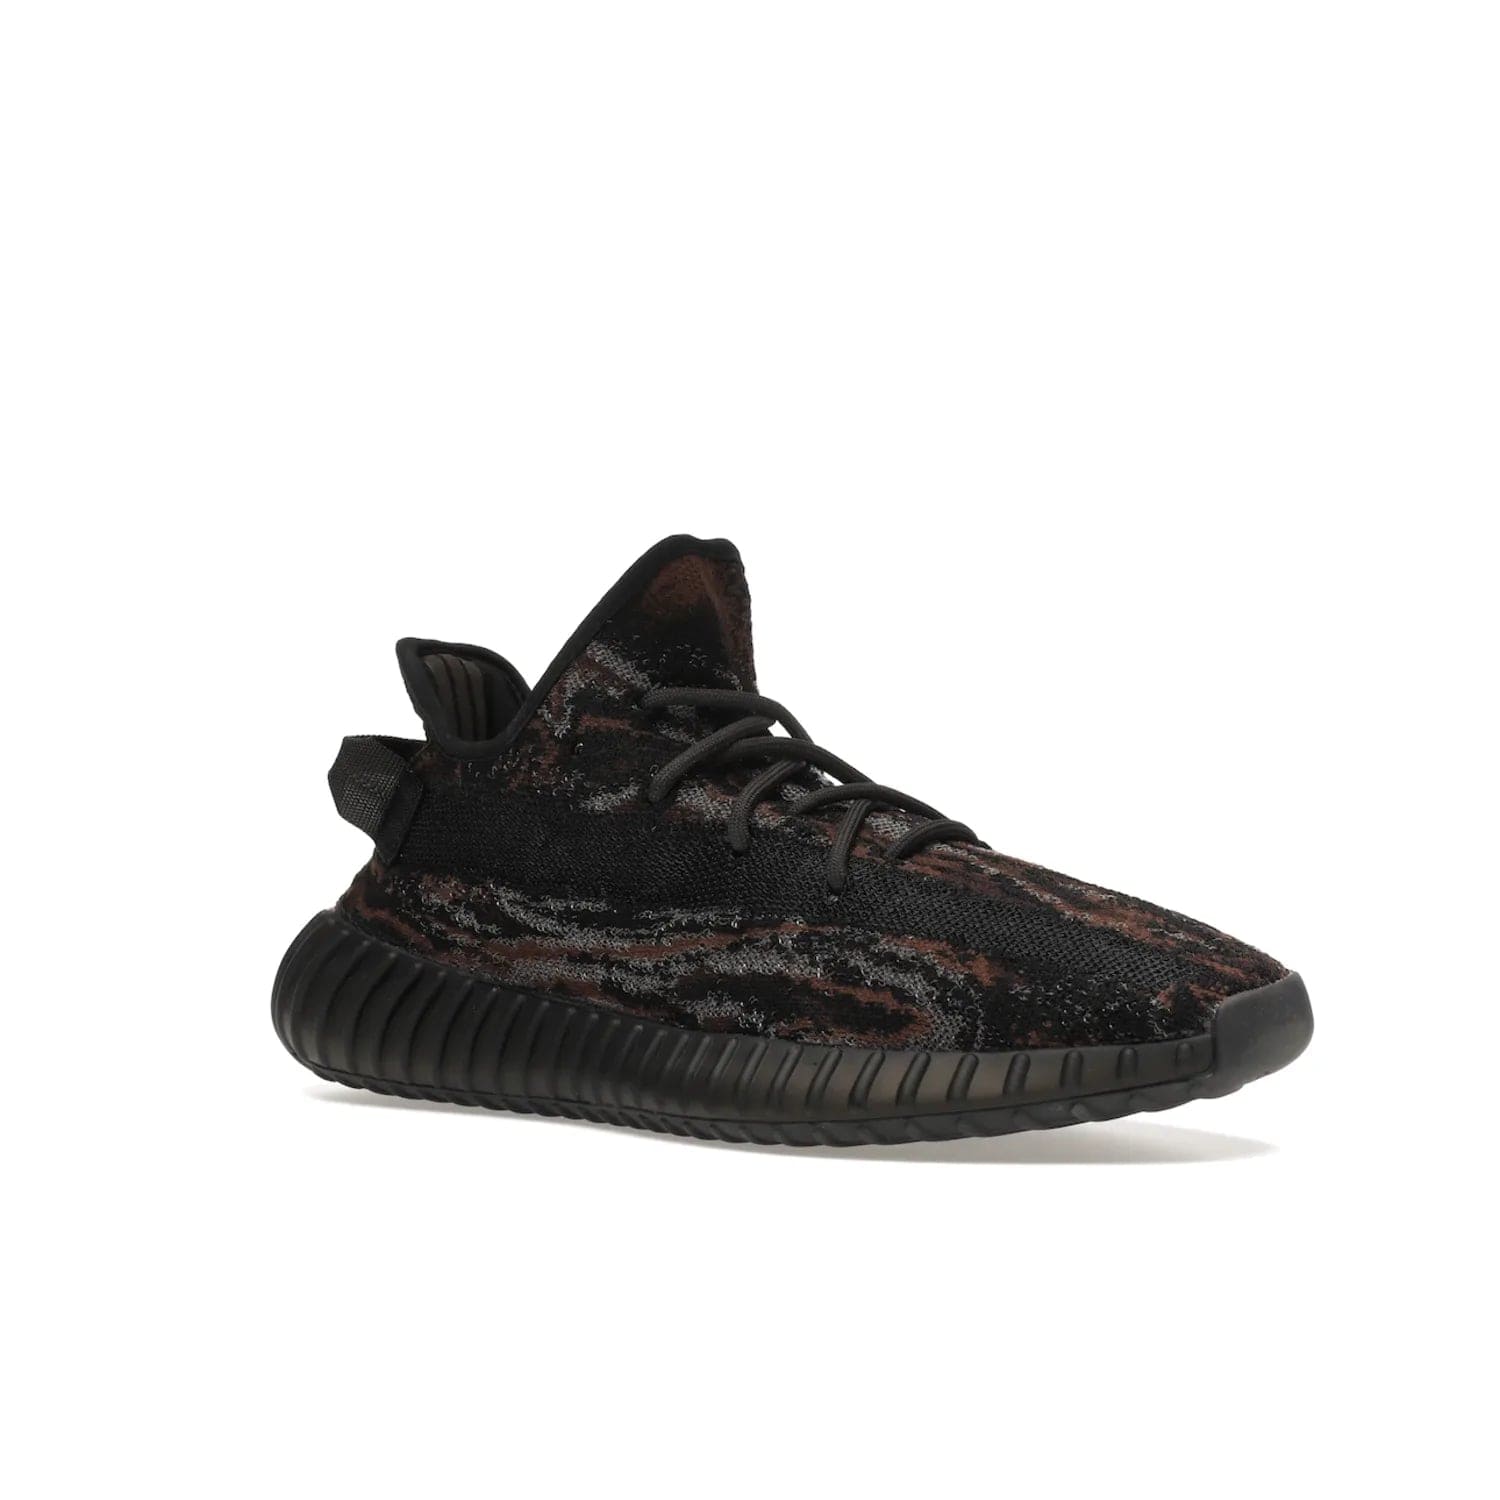 adidas Yeezy Boost 350 V2 MX Rock - Image 5 - Only at www.BallersClubKickz.com - The adidas Yeezy Boost 350 V2 MX Rock features a stylish marbled upper of black, grey, and brown tones. Shop the signature Boost sole, heel tab, and mesh side stripe now, available December of 2021.